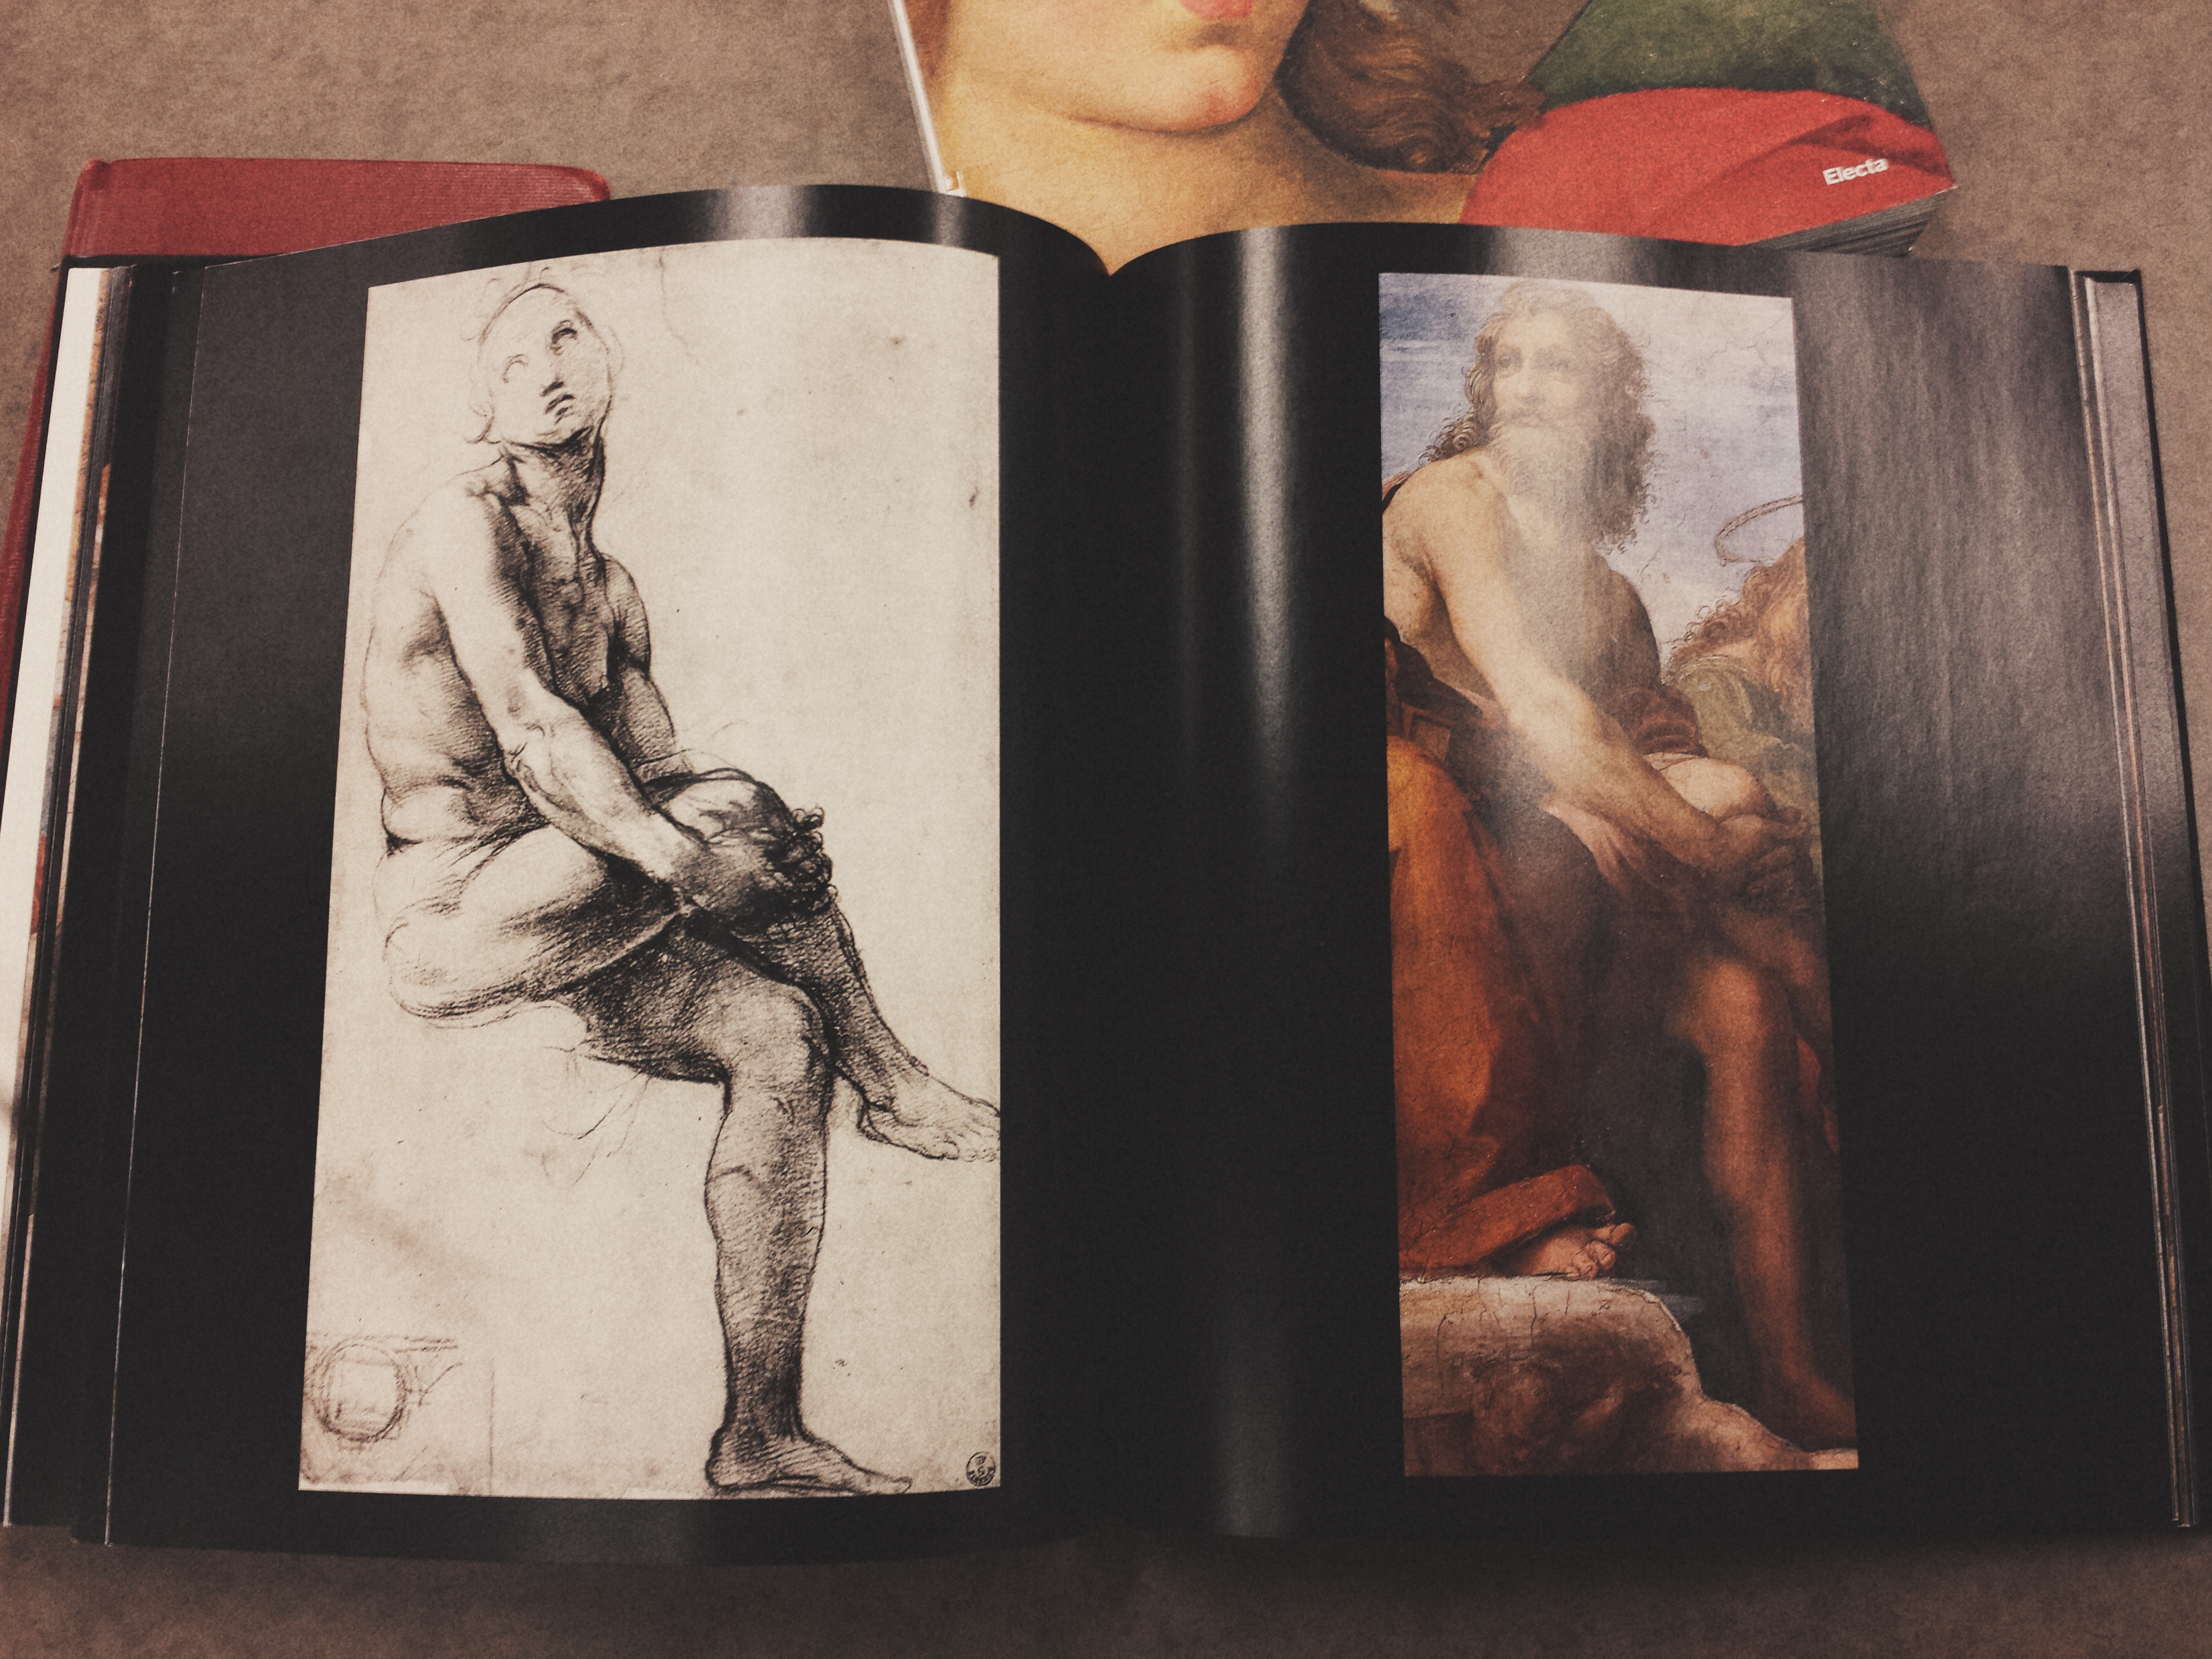 An art book I found in the Robarts stacks about Raphael's works. Flipped to a page of a character study, comparing his rough sketch and the final product of one of his paintings.